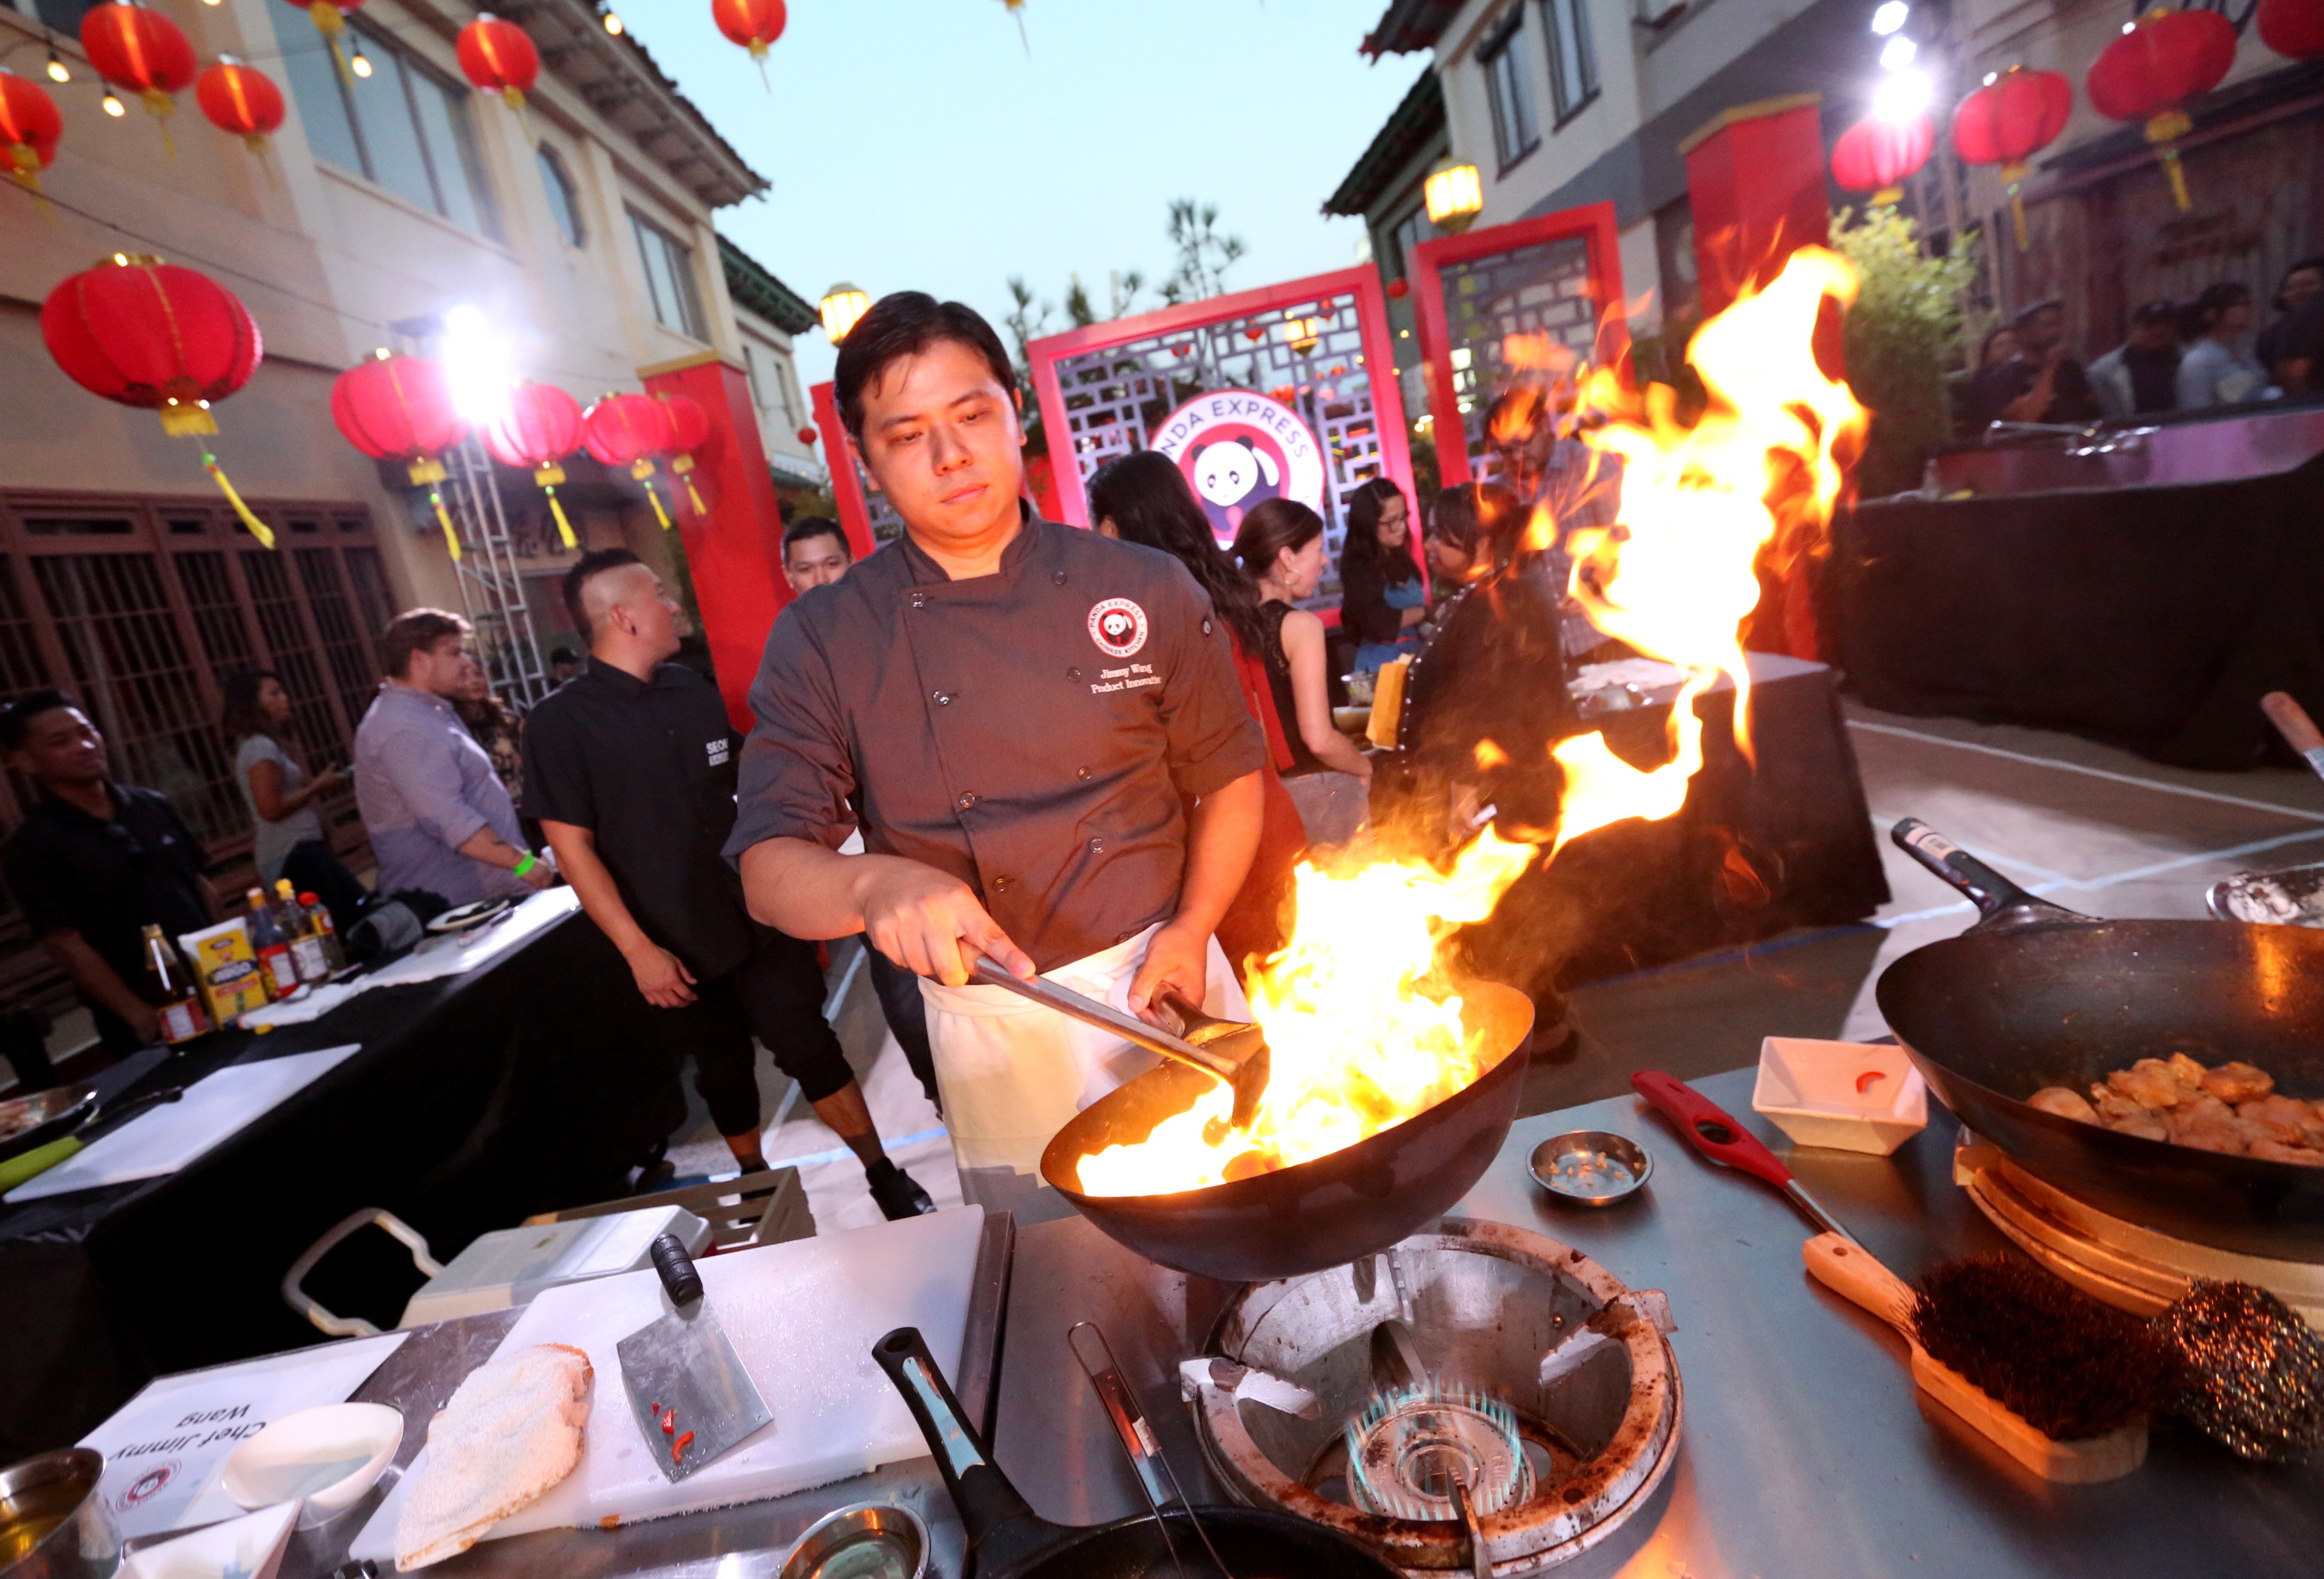 Chef Jimmy Wang prepares Panda Express' General Tso's chicken at Chinatown Summer Nights on Saturday, Aug. 20, 2016, in Los Angeles (Casey Rodgers—Invision for Panda Restaurant Group)